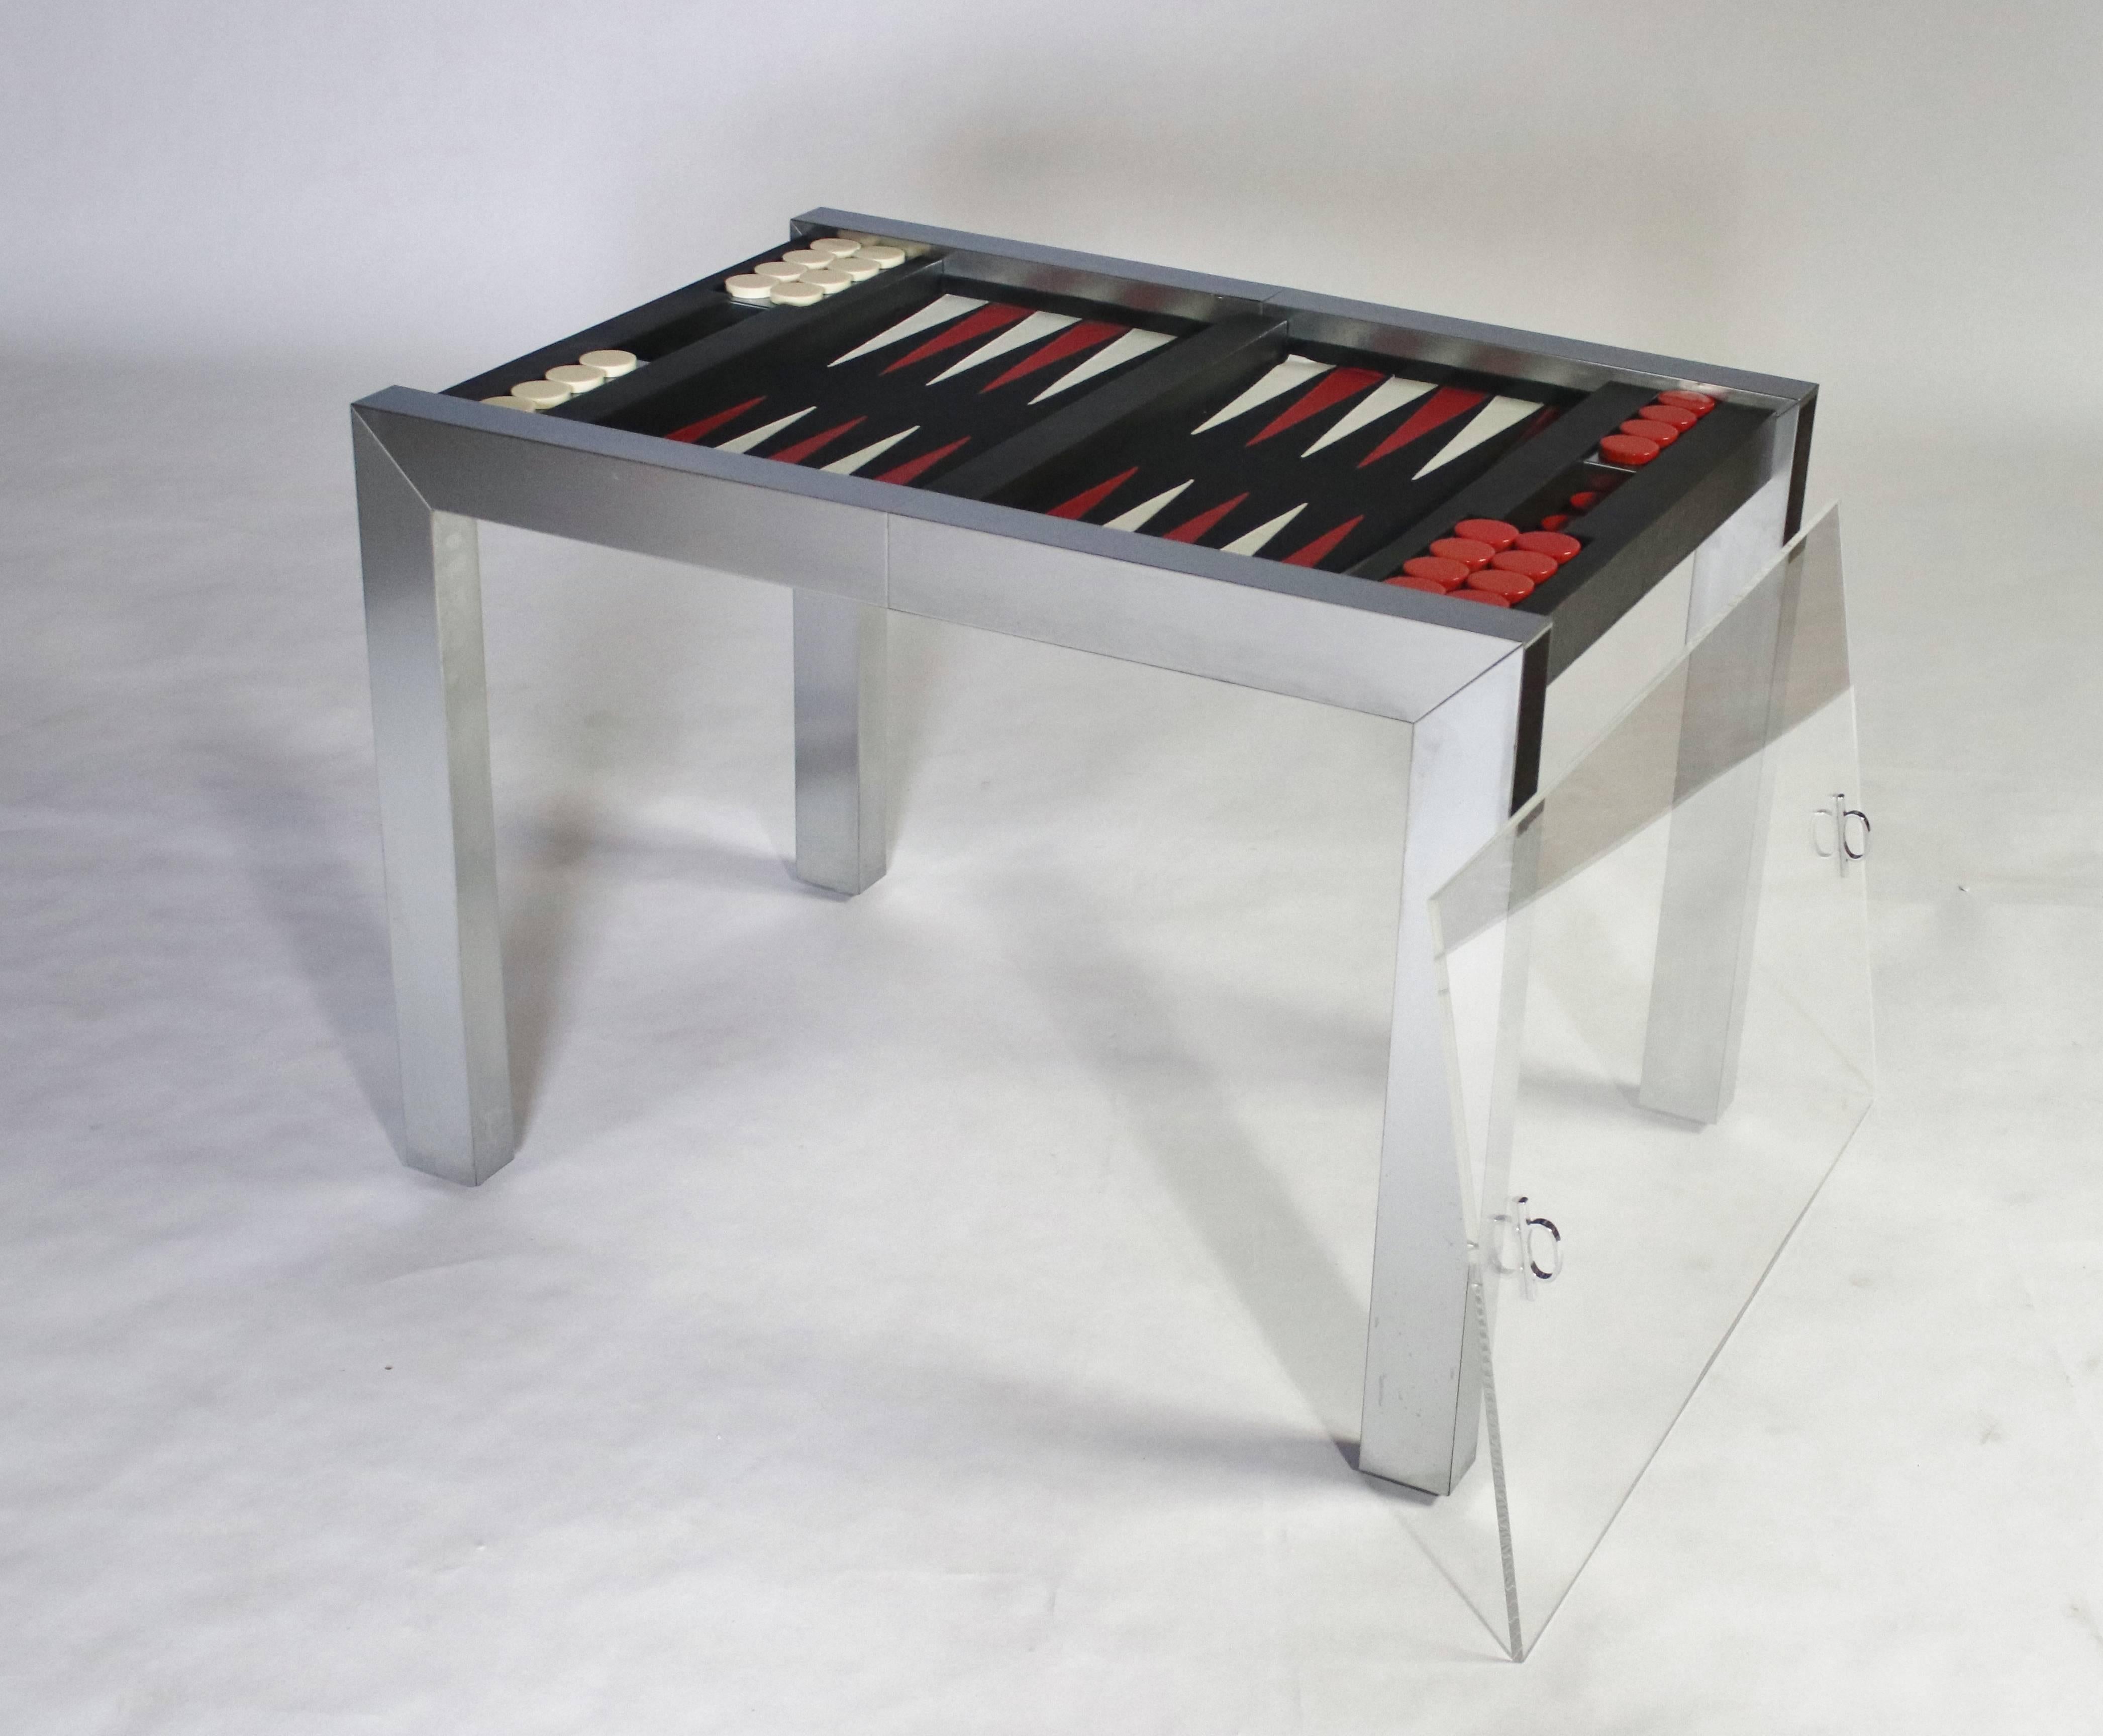 Paul Evans studio backgammon game table model P.E. 742 from the PE 800 series for Directional. Chrome-plated steel frame with leather board and acrylic playing pieces. Covered by a plexiglass slide-on top with chrome handles which fits upside down